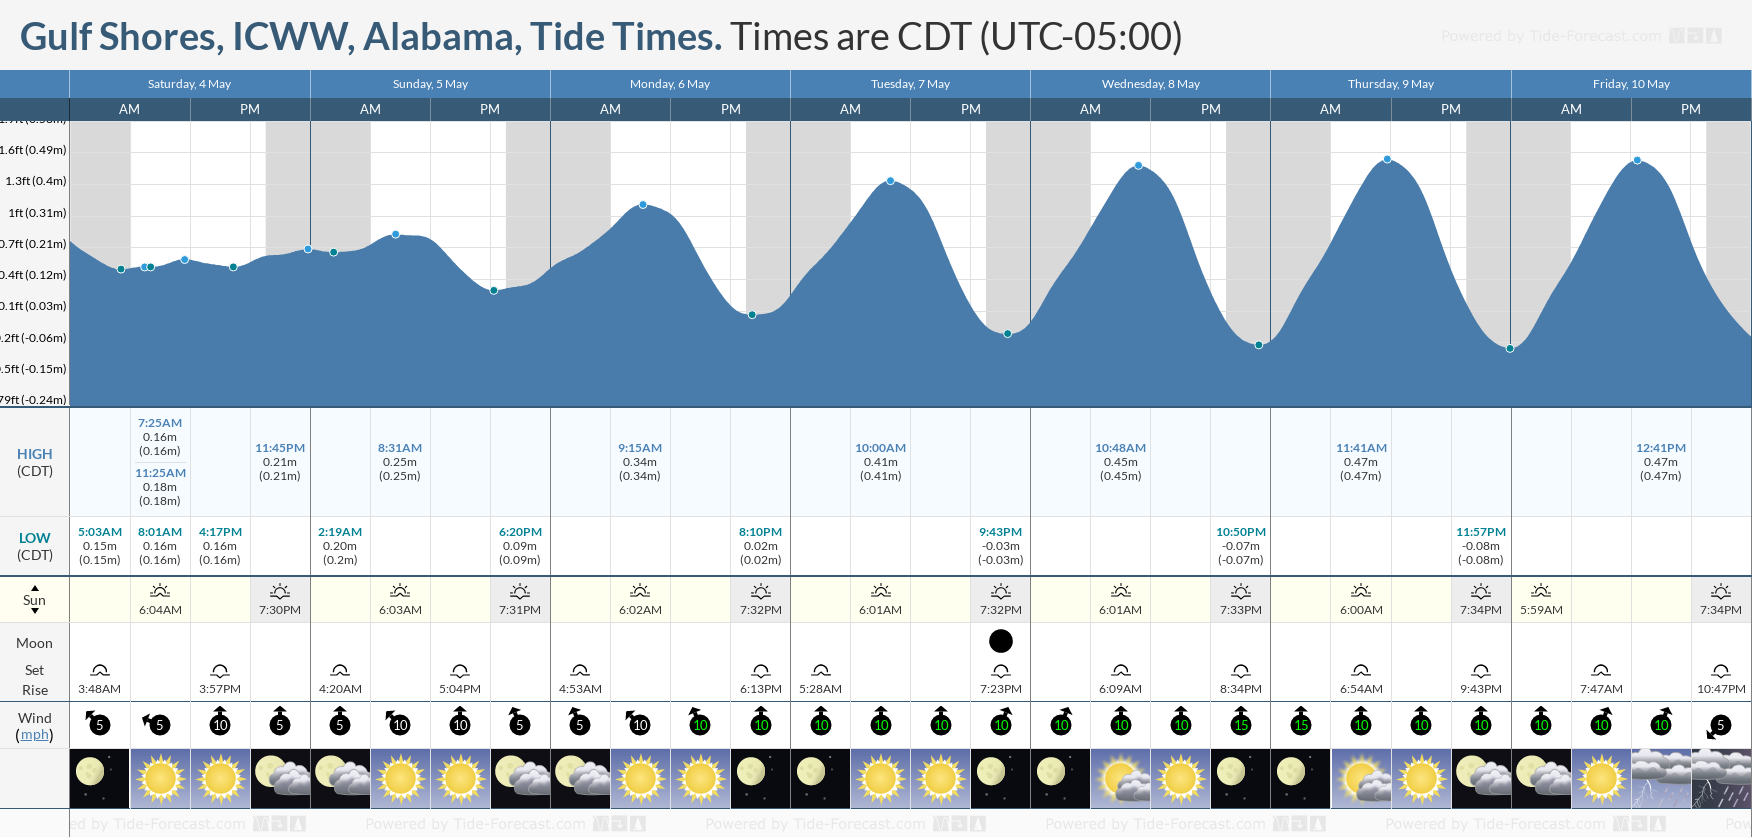 Gulf Shores, ICWW, Alabama Tide Chart including high and low tide tide times for the next 7 days